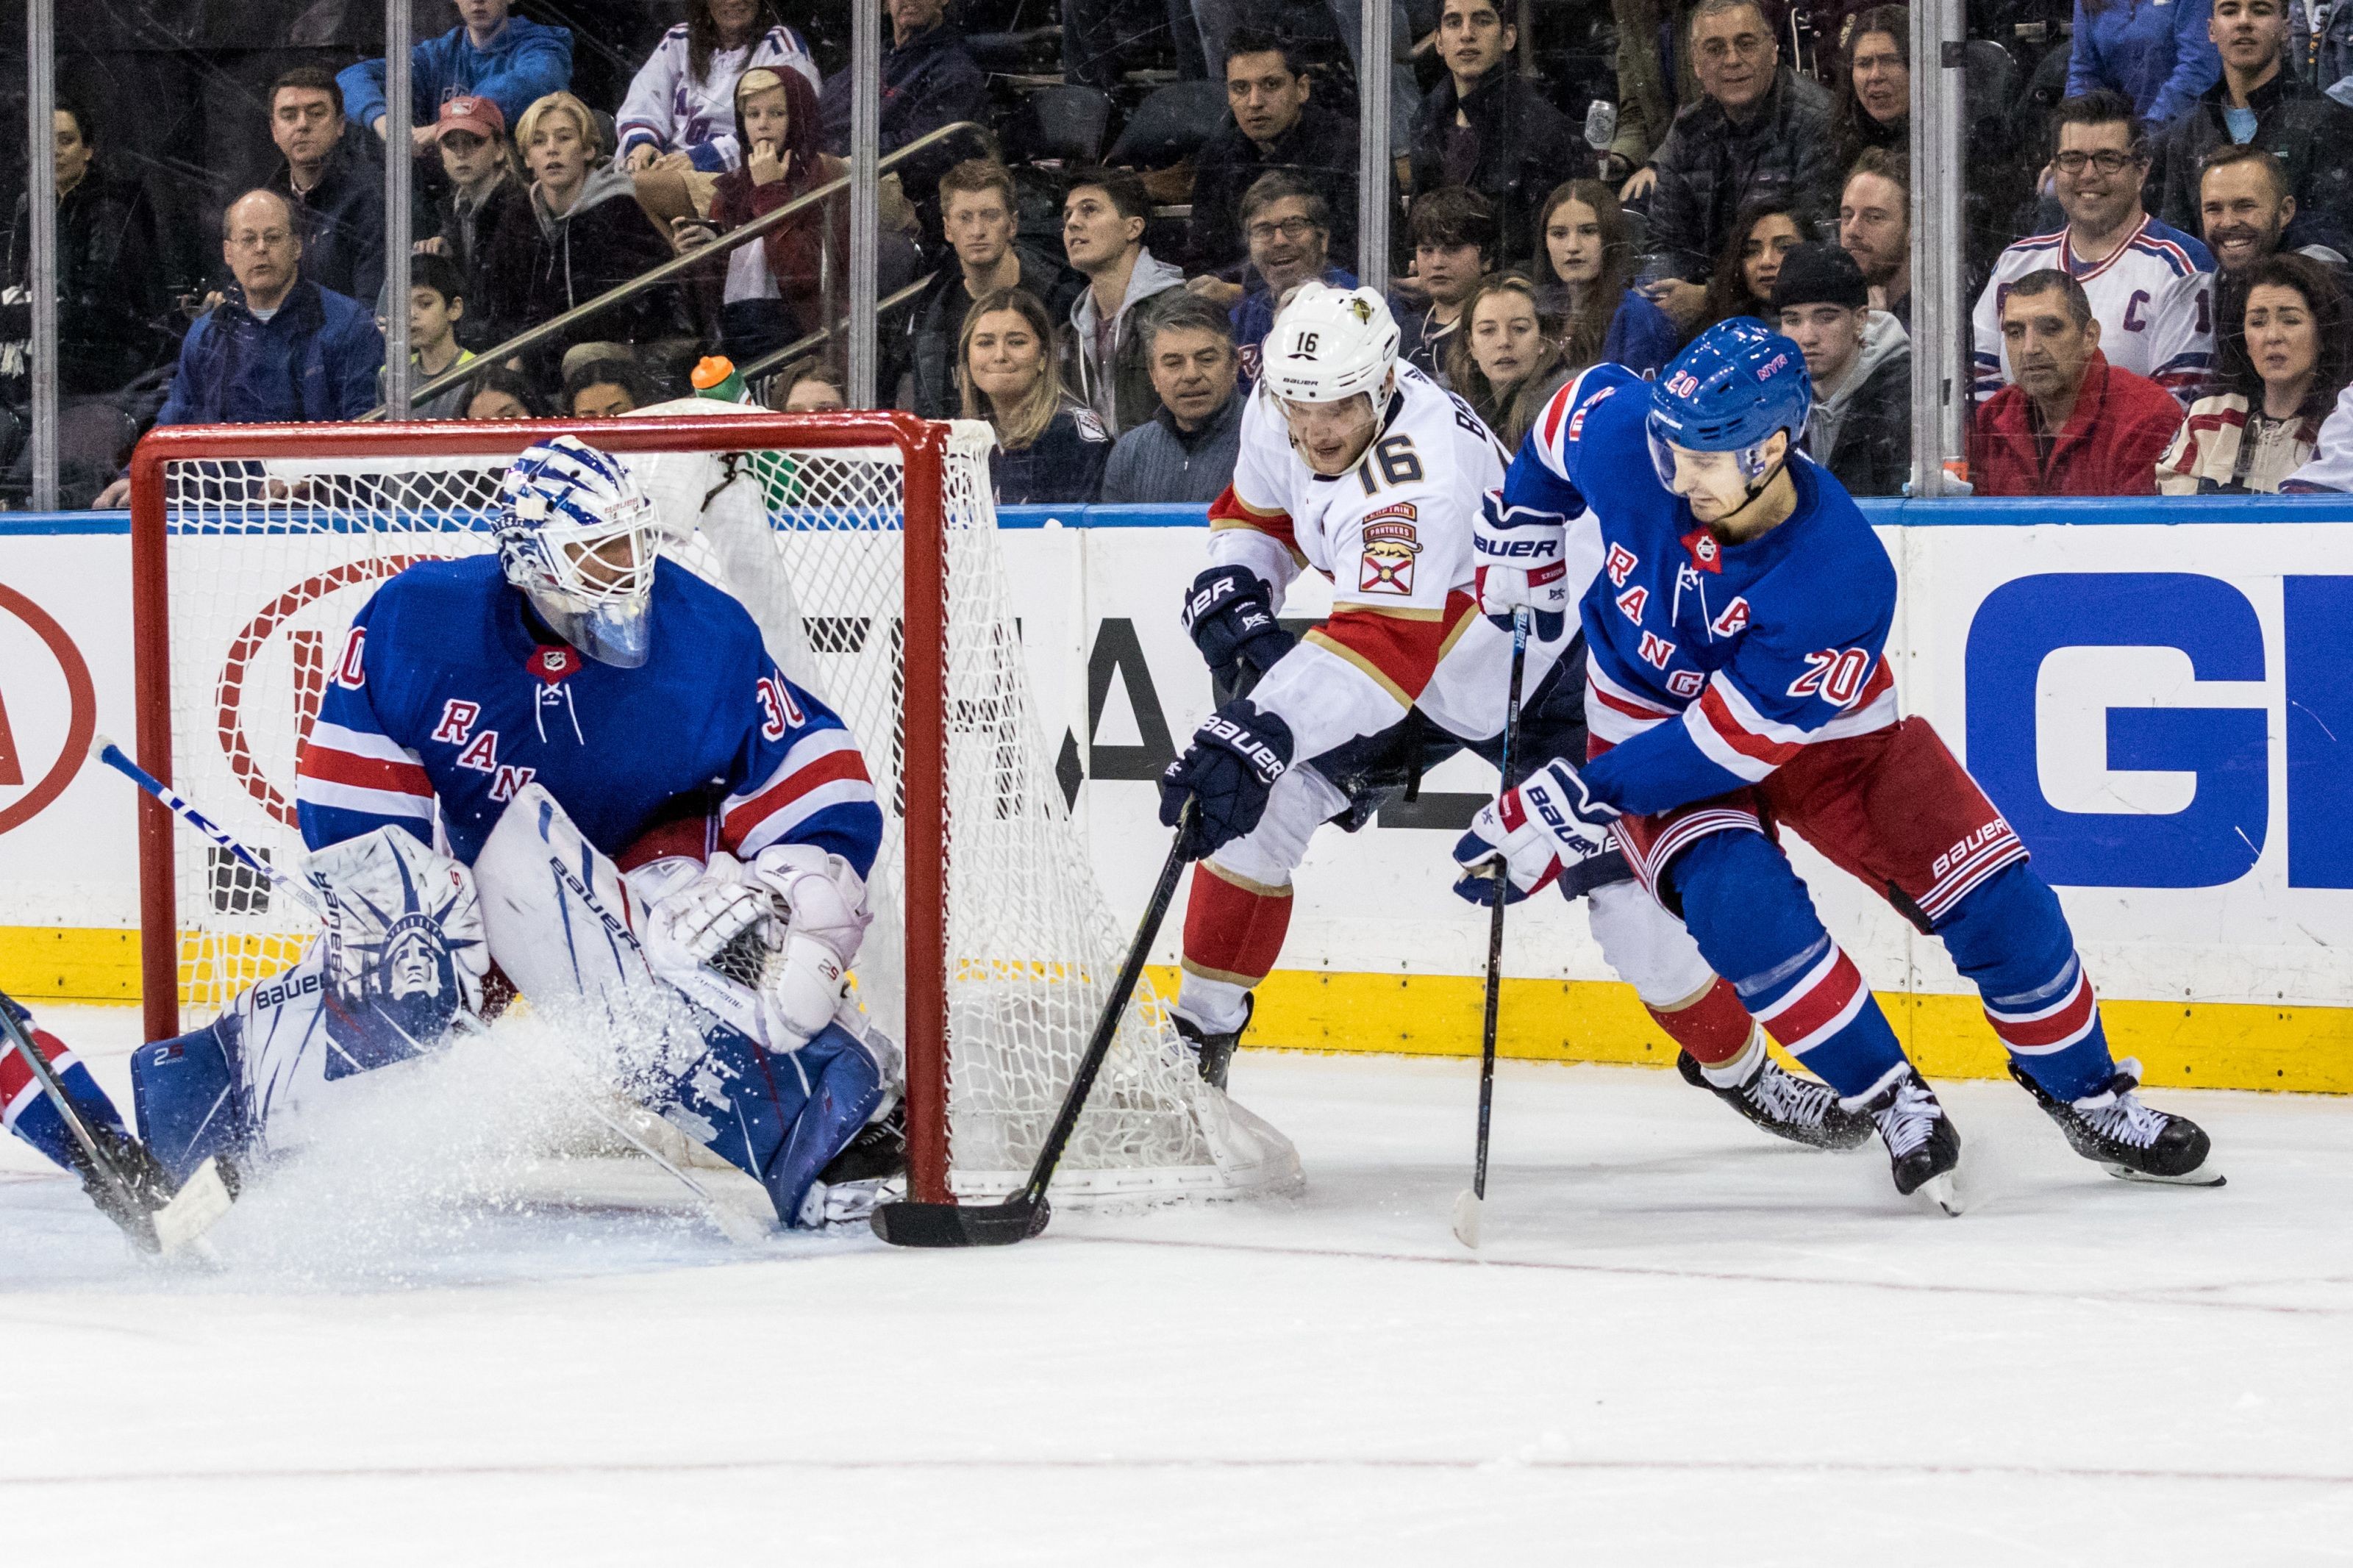 New York Rangers vs Florida Panthers Looking to rebound after worst